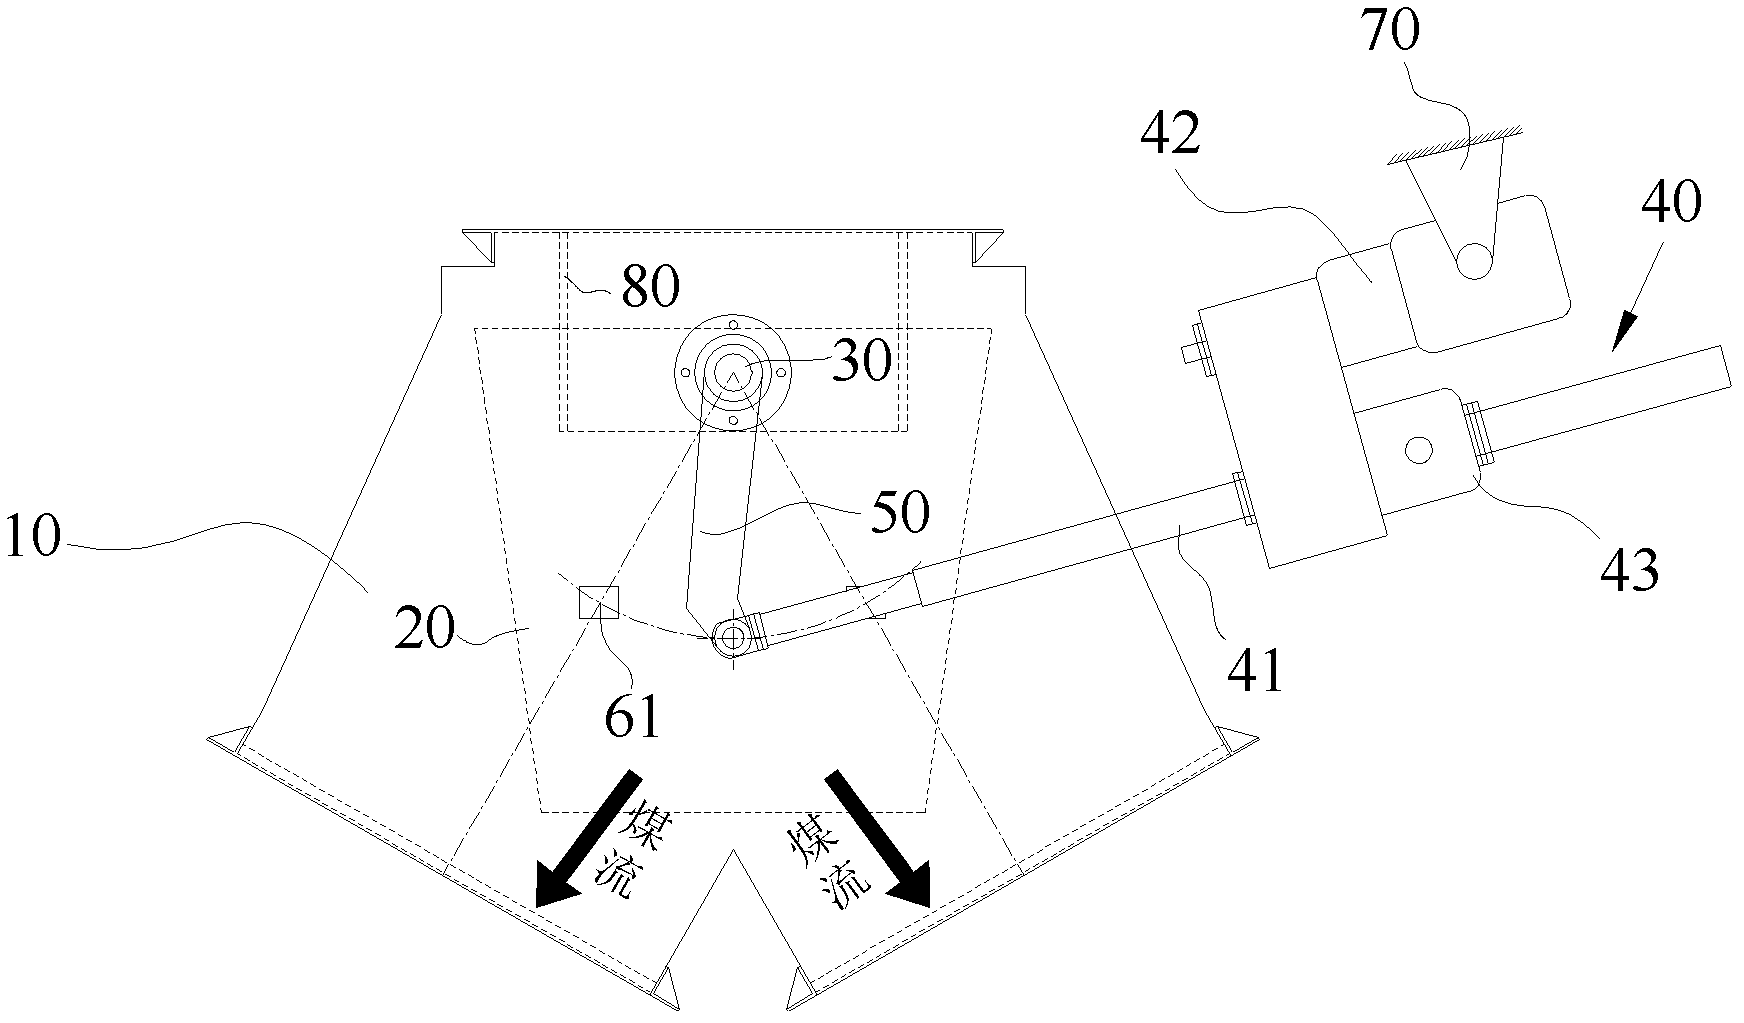 Material distribution device